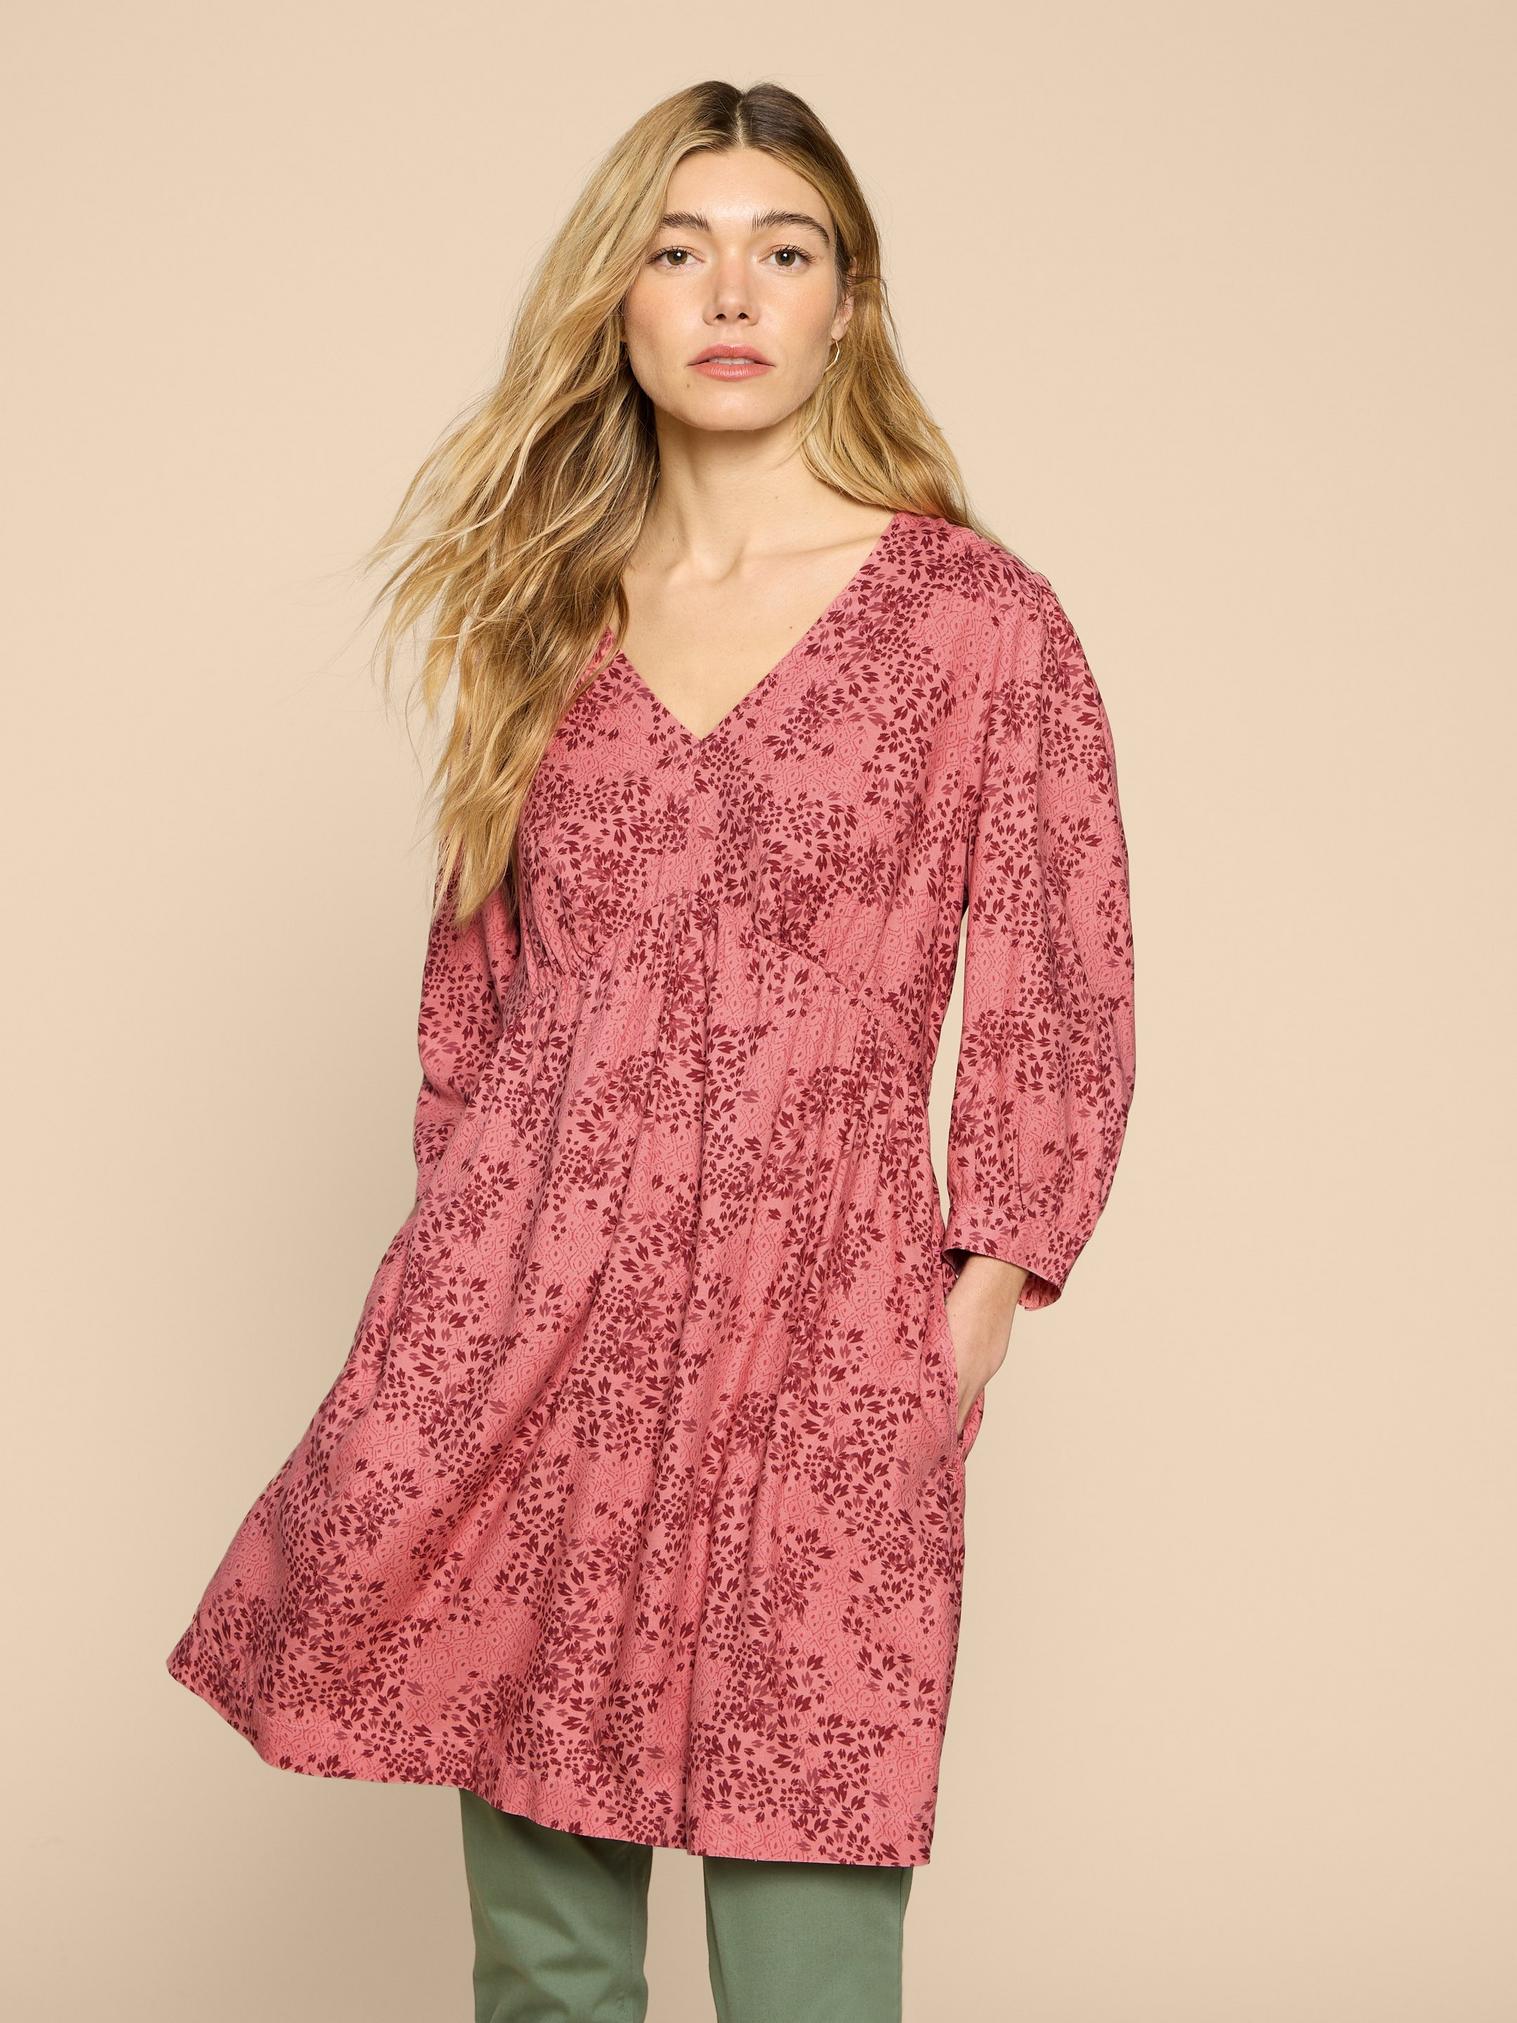 Lucy Eco Vero Tunic in PINK MLT - LIFESTYLE